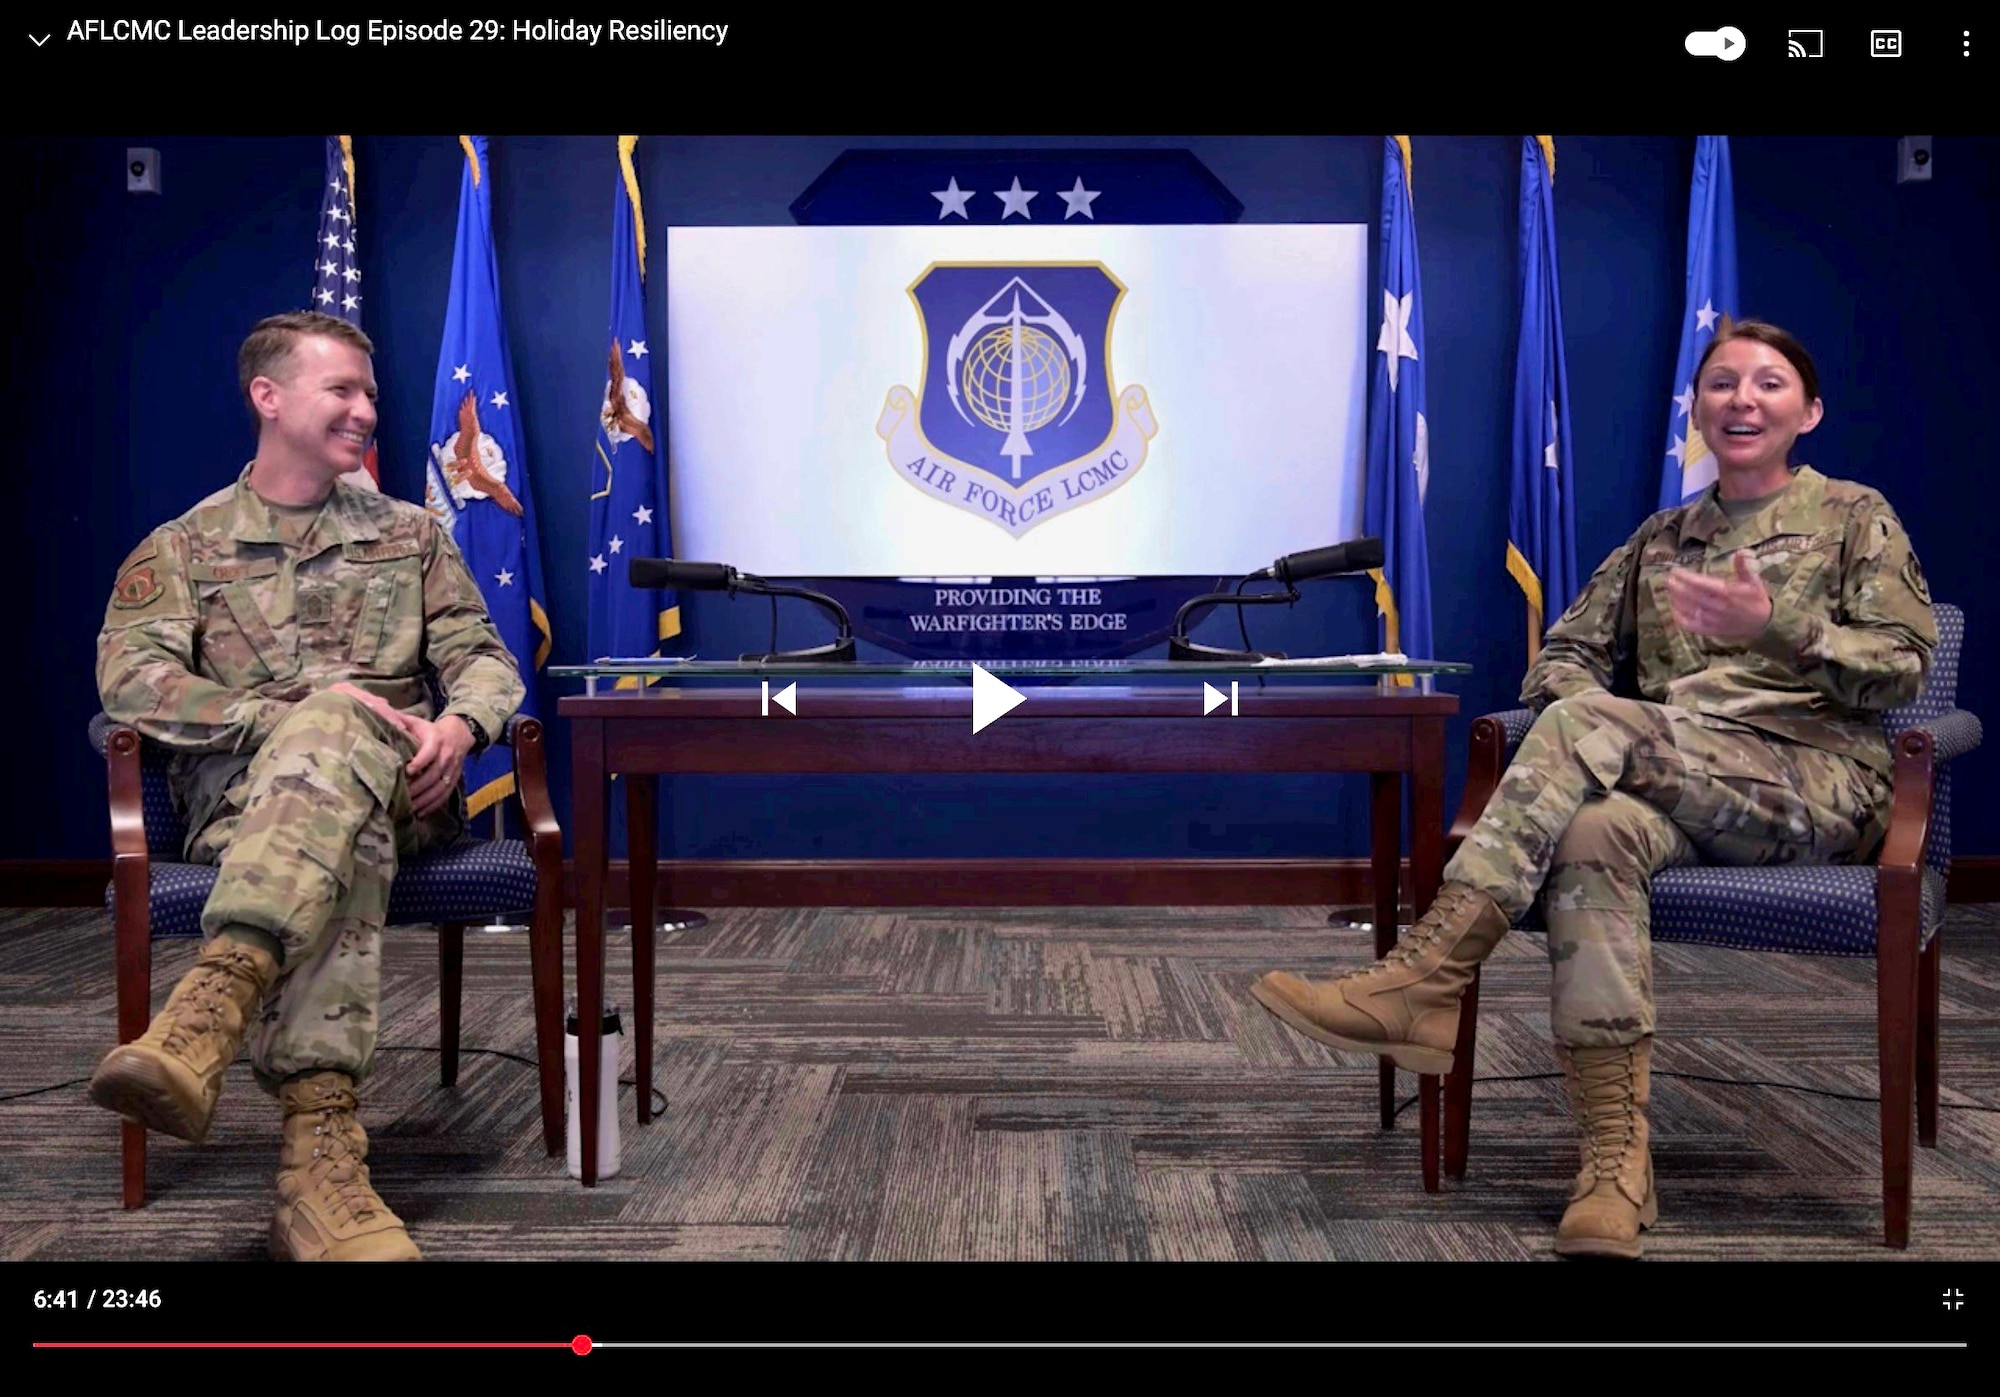 A screenshot of Chief Master Sgt. Troie Croft, AFLCMC Command Chief, and Senior Master Sgt. Elise Phillips, AFLCMC First Sergeant, sitting side by side during a Leadership Log video podcast.